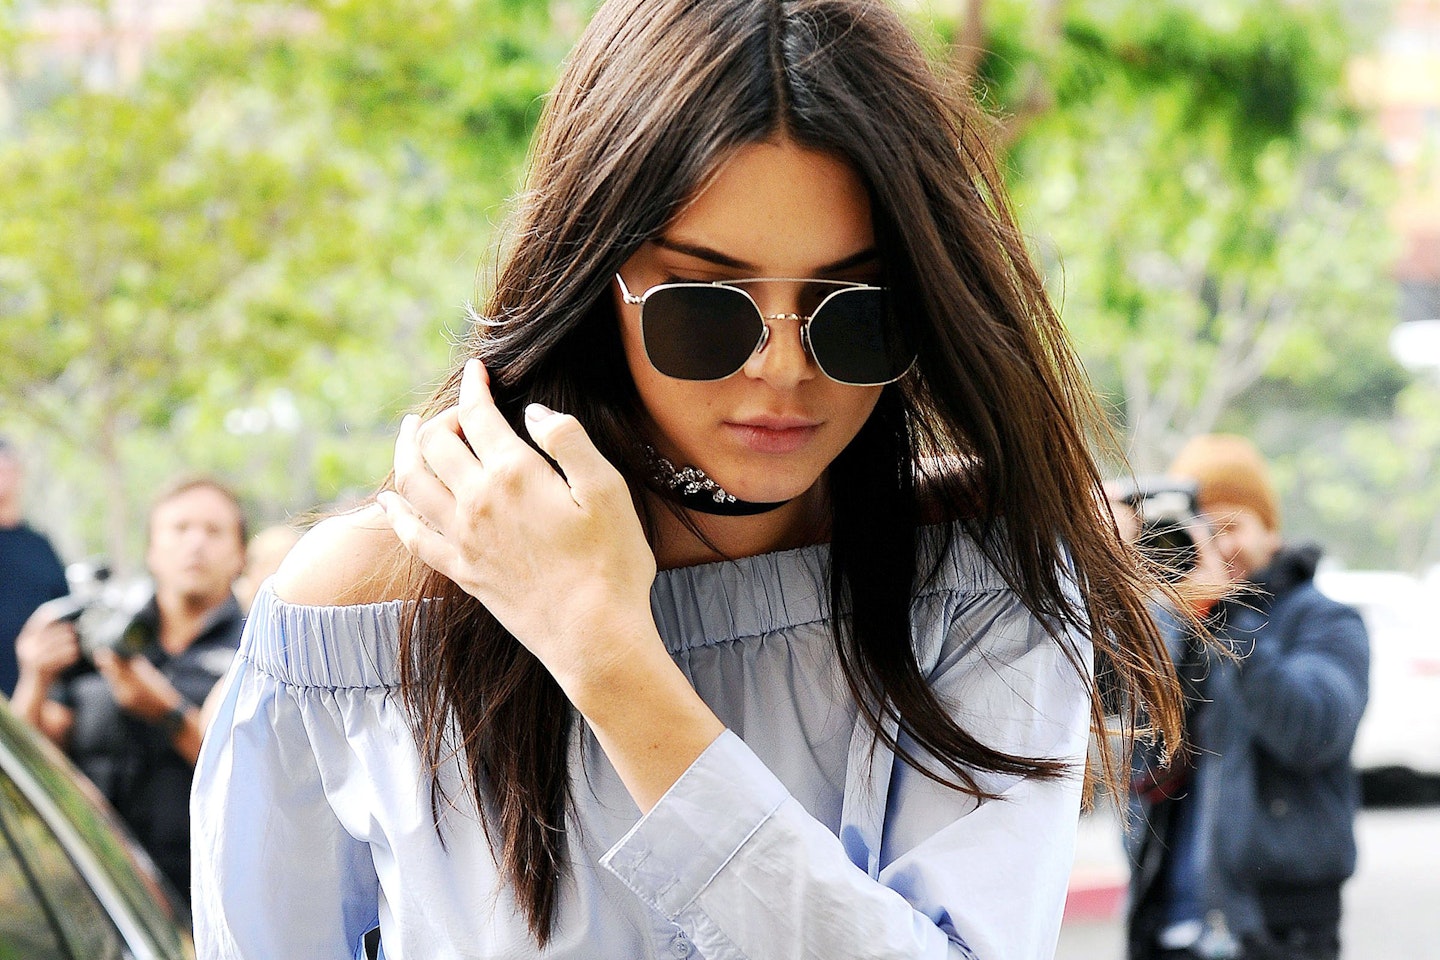 Kendall Jenner Doesn't Care If Going Braless Bothers You